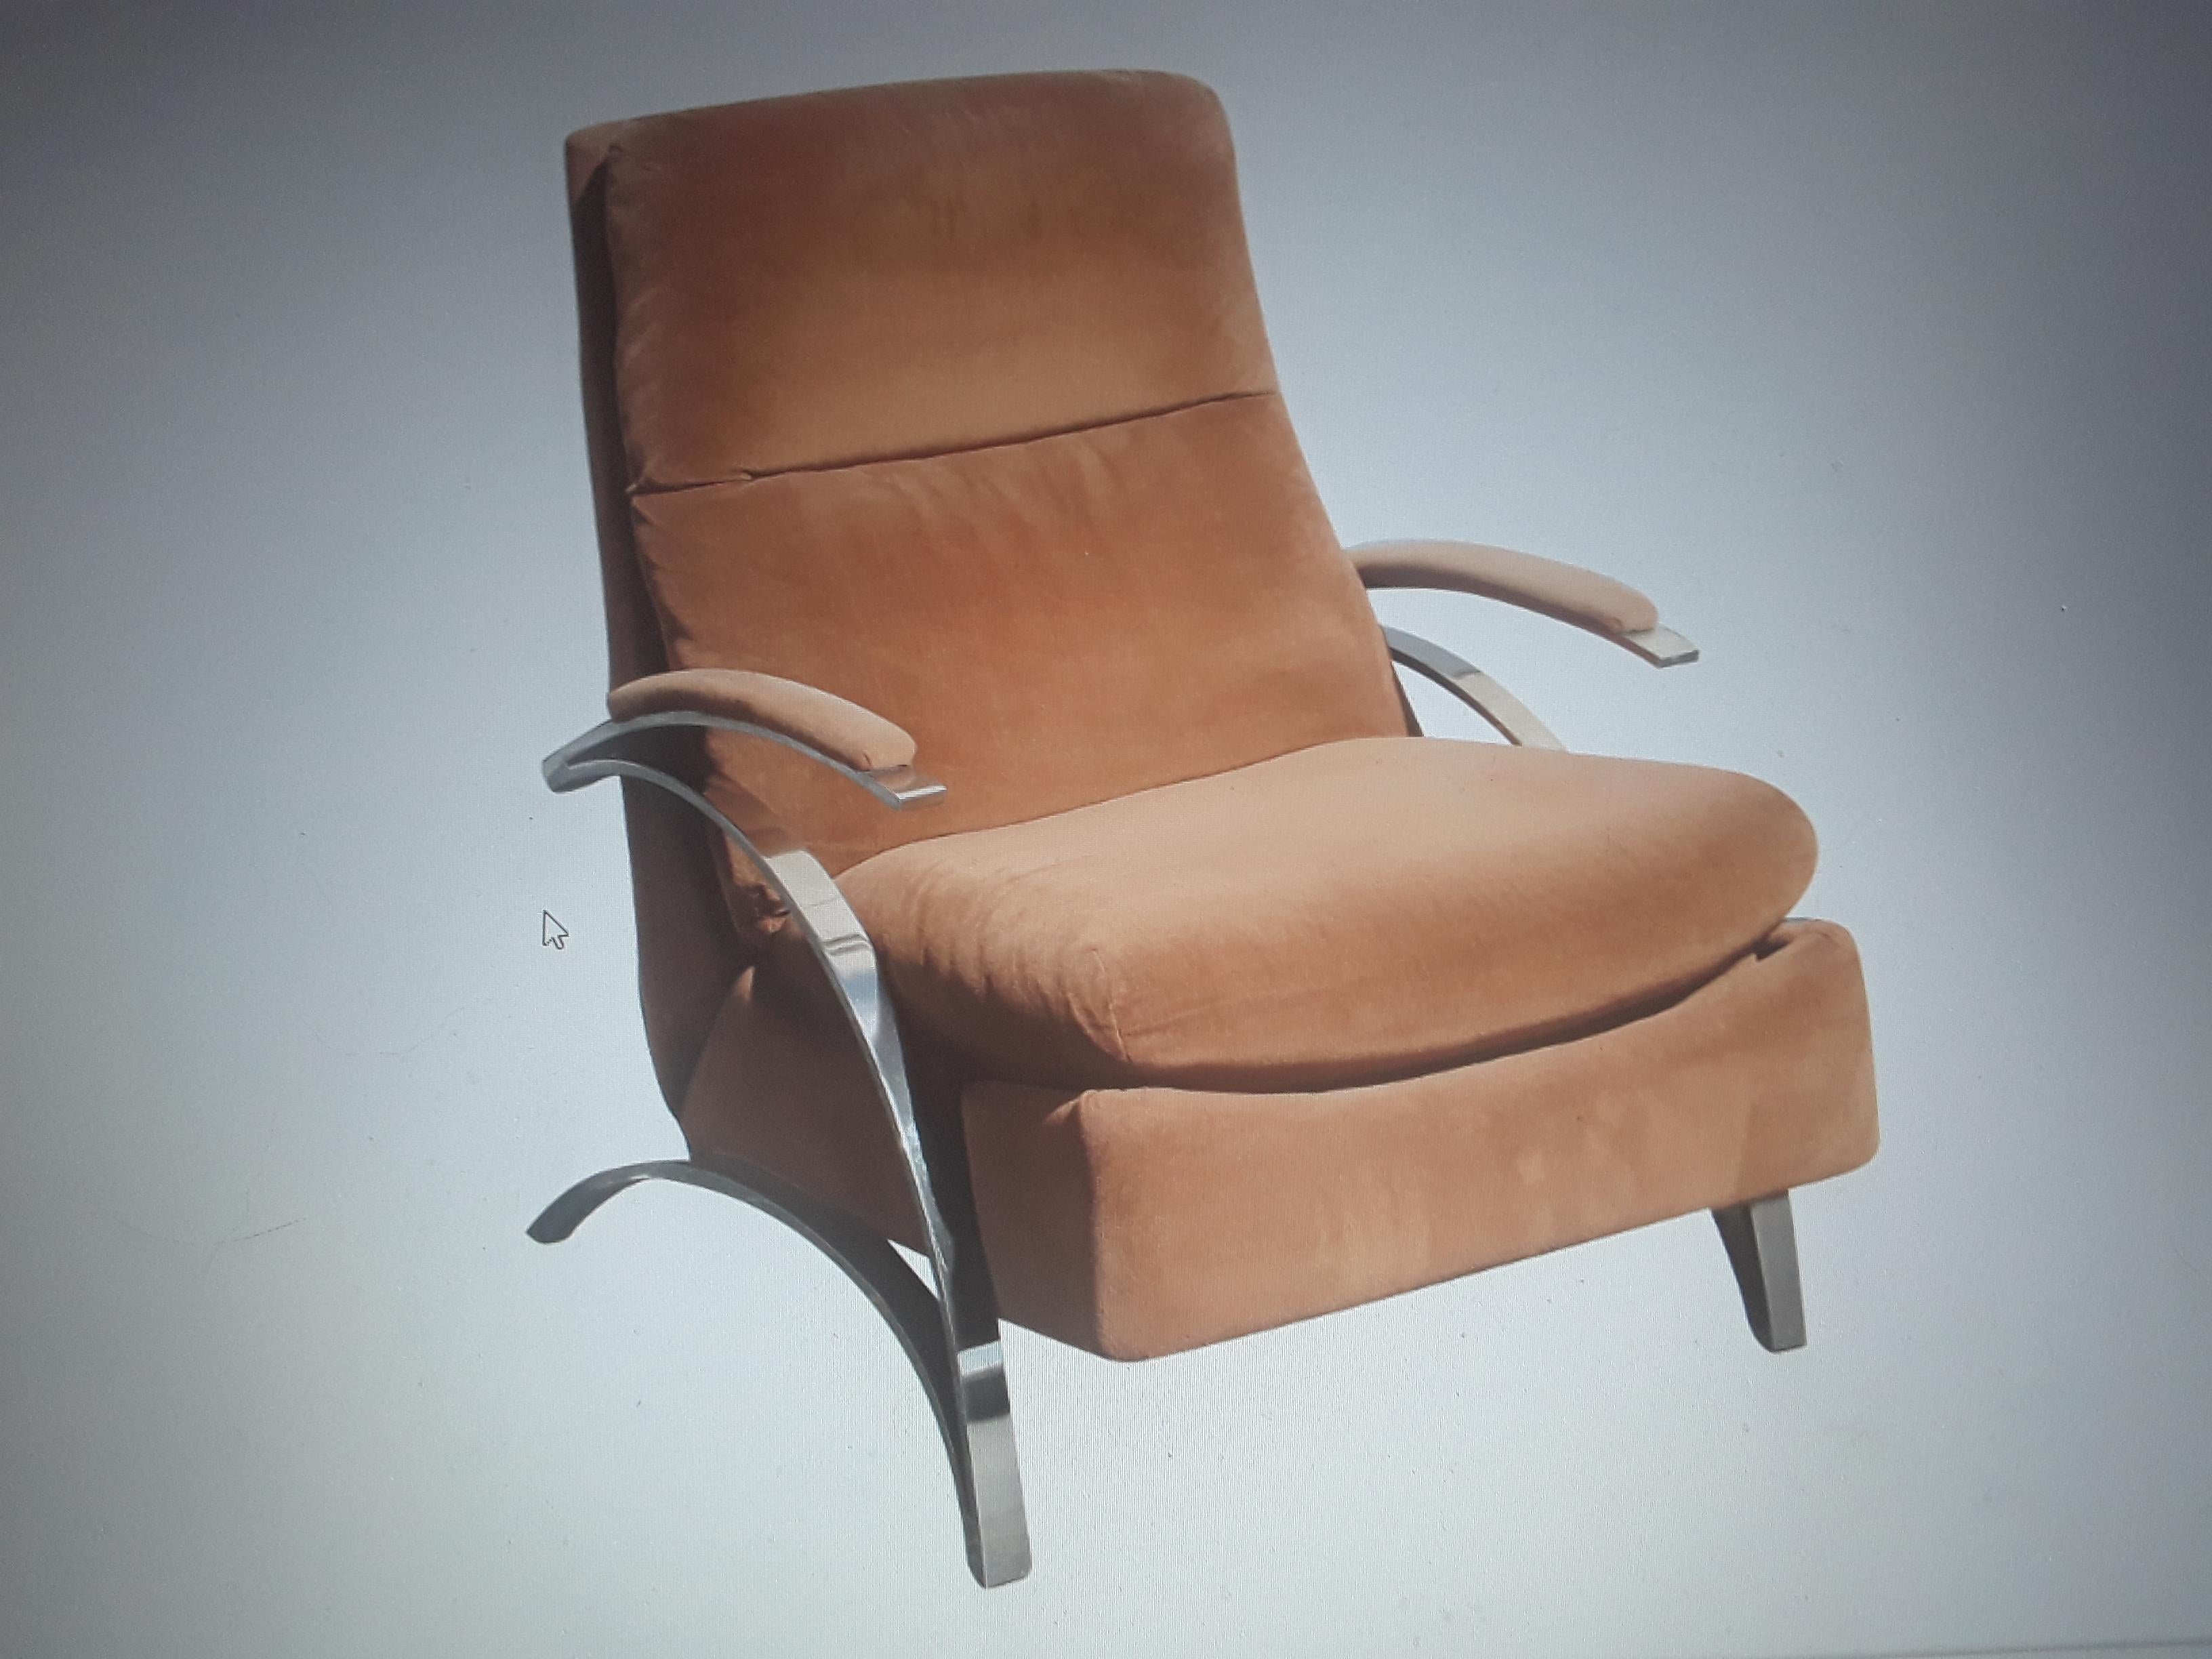 1970's Modern Plush Brown w/ Chrome Barcalounger Recliner/ Lounge Chair For Sale 10